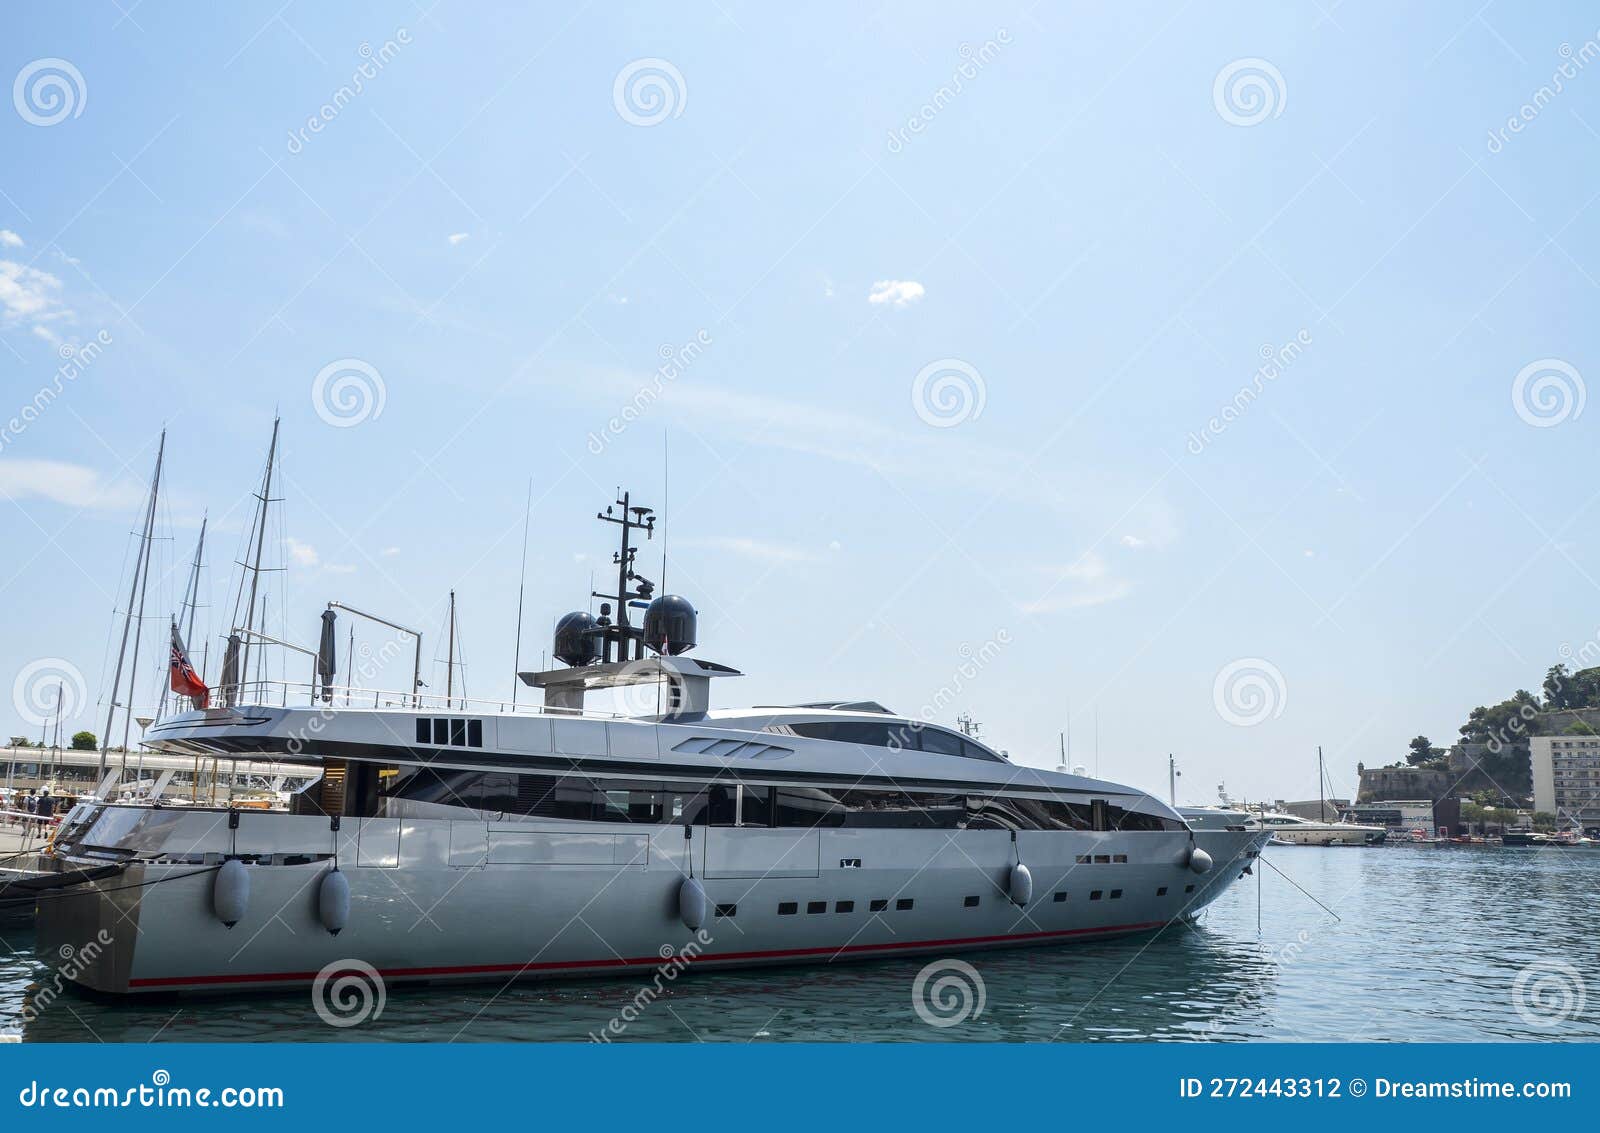 HERCULES Yacht for Sale